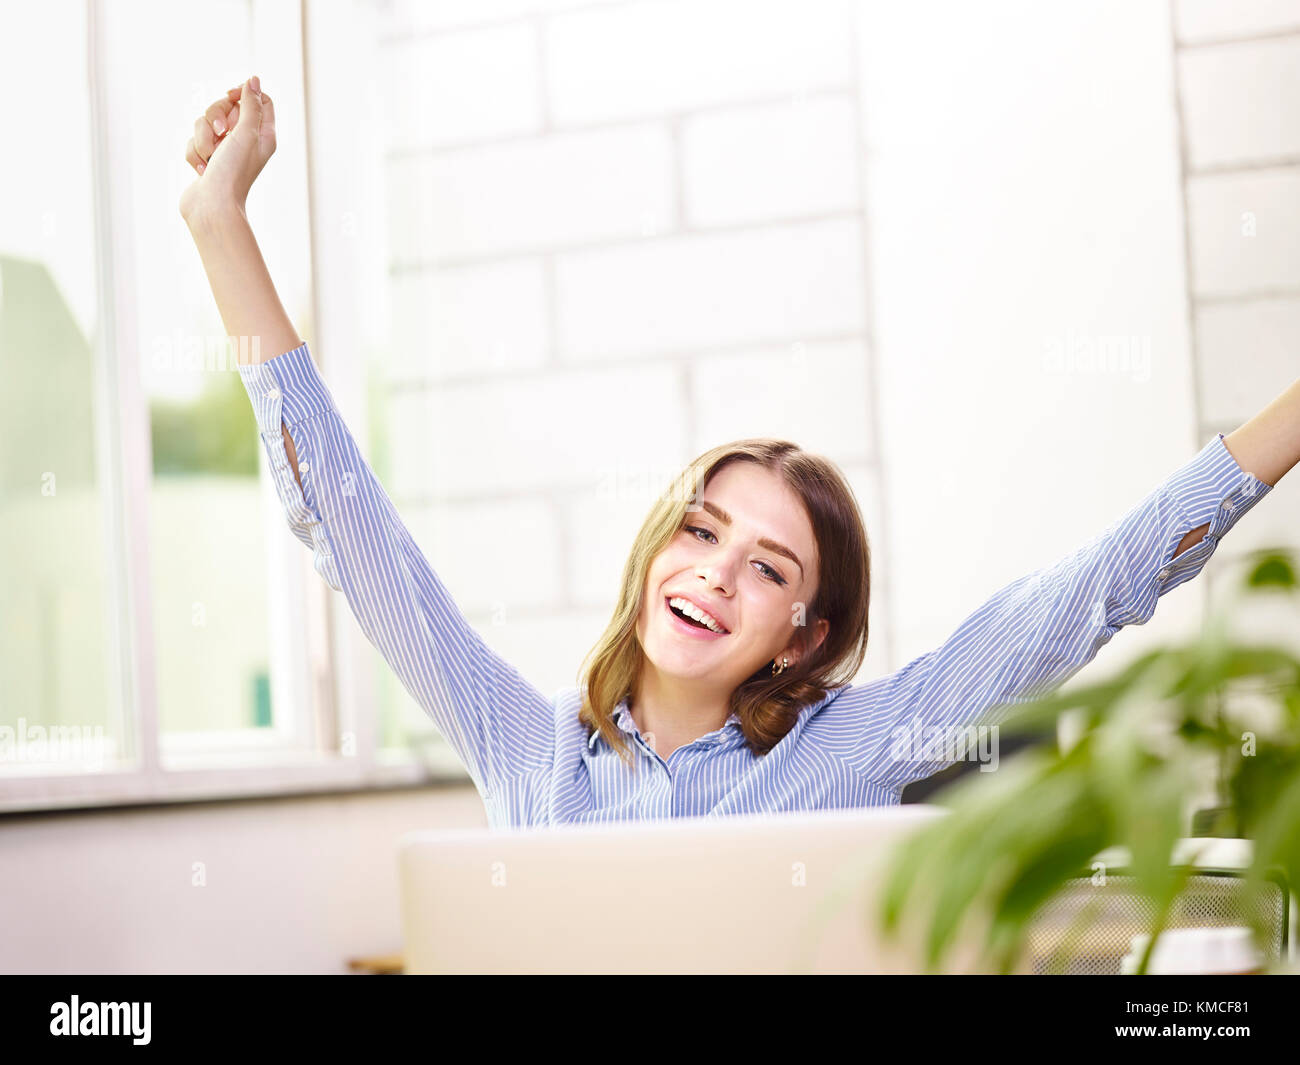 young caucasian business executive stretching arms in office celebrating completion of task. Stock Photo